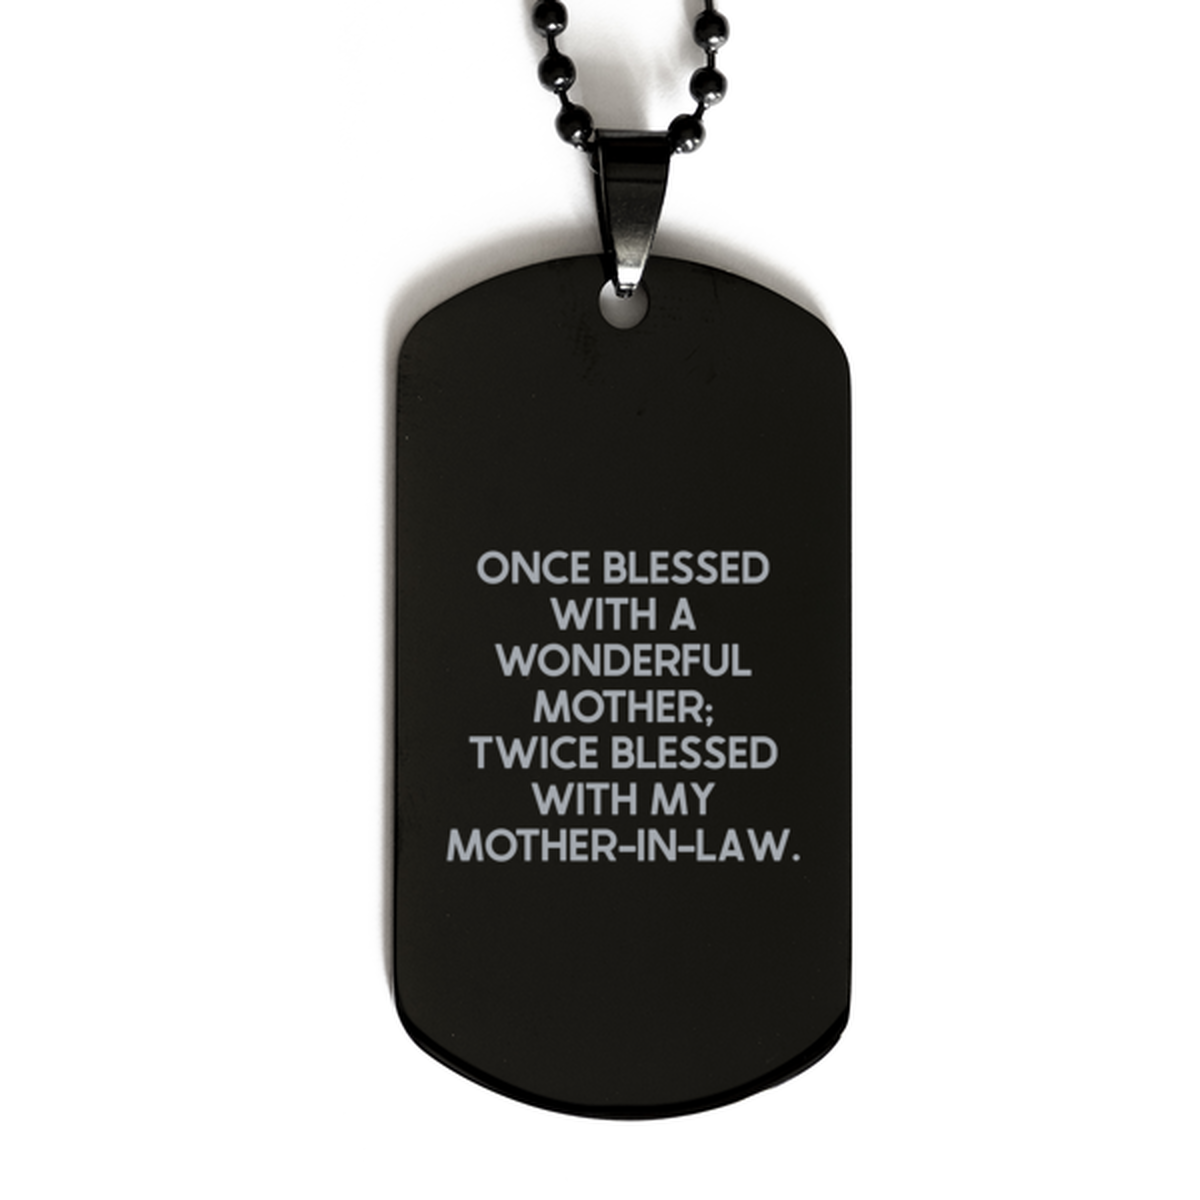 To My Mother-In-Law Black Dog Tag, Wonderful Mother, Mothers Day Gifts For Mother-In-Law From Daughter-In-Law, Birthday Gifts For Women